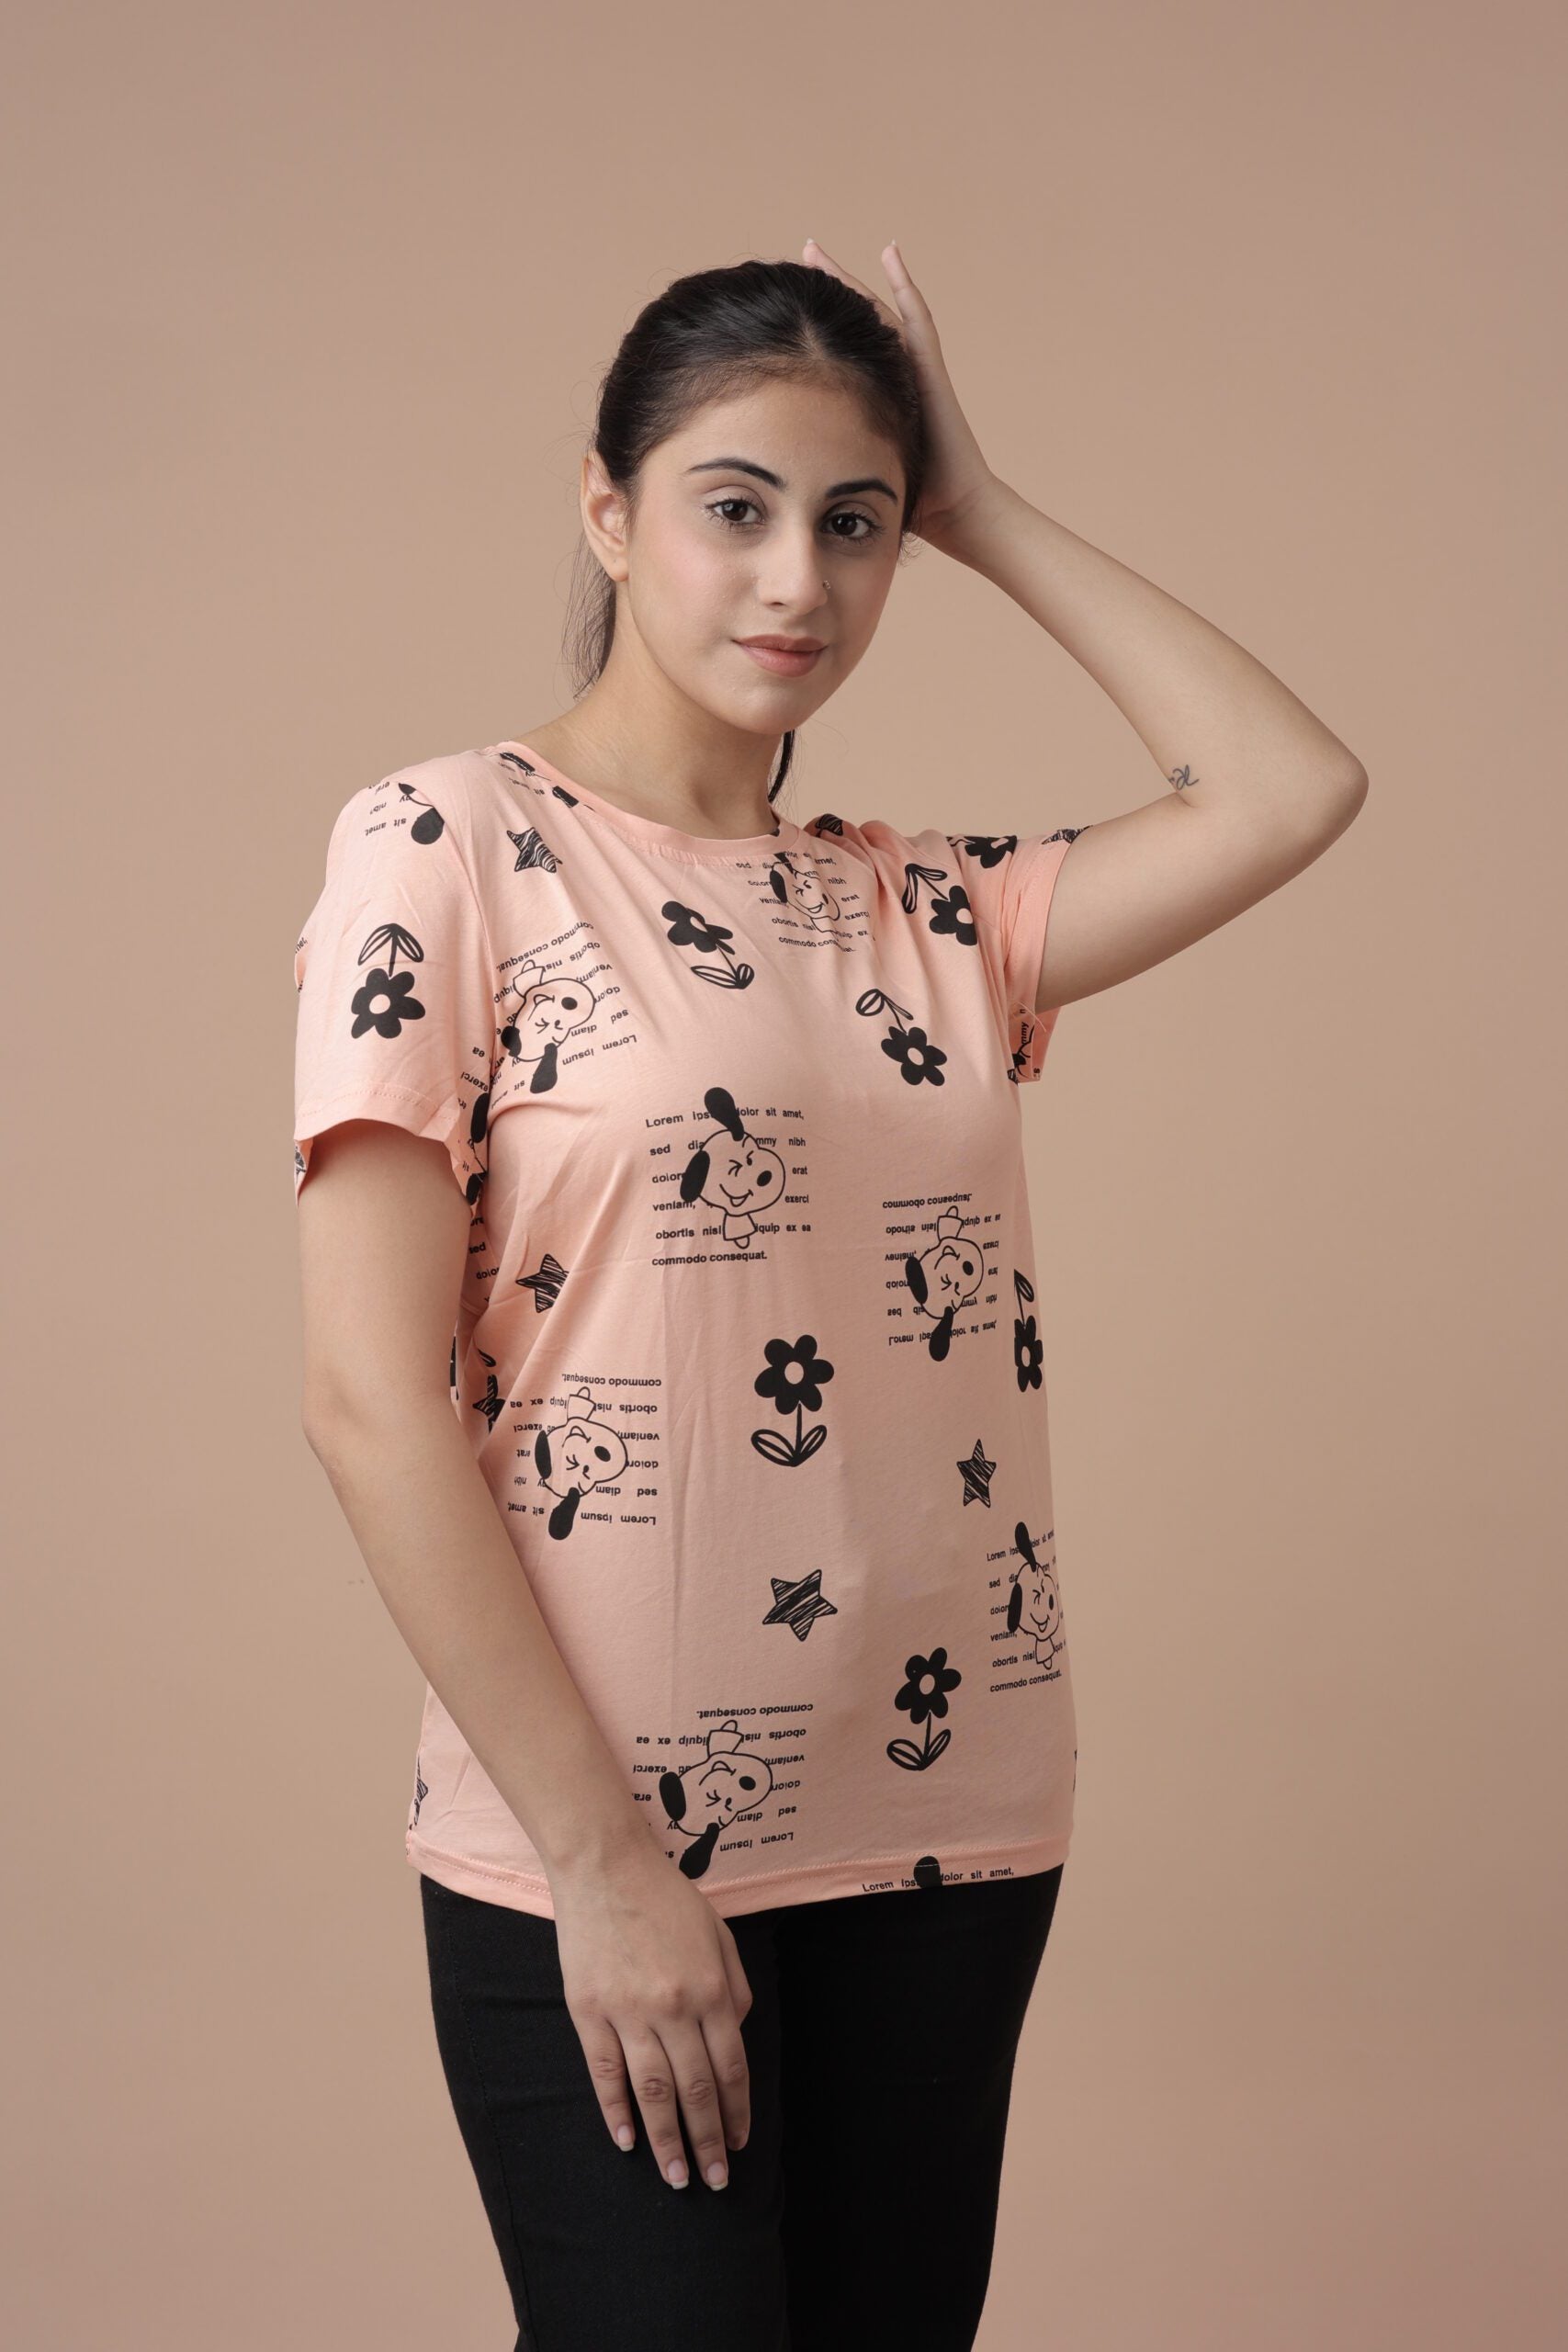 Graffiti Tshirt (Peachish Pink) Express Your Unique Style with a Splash of Playful Creativity!